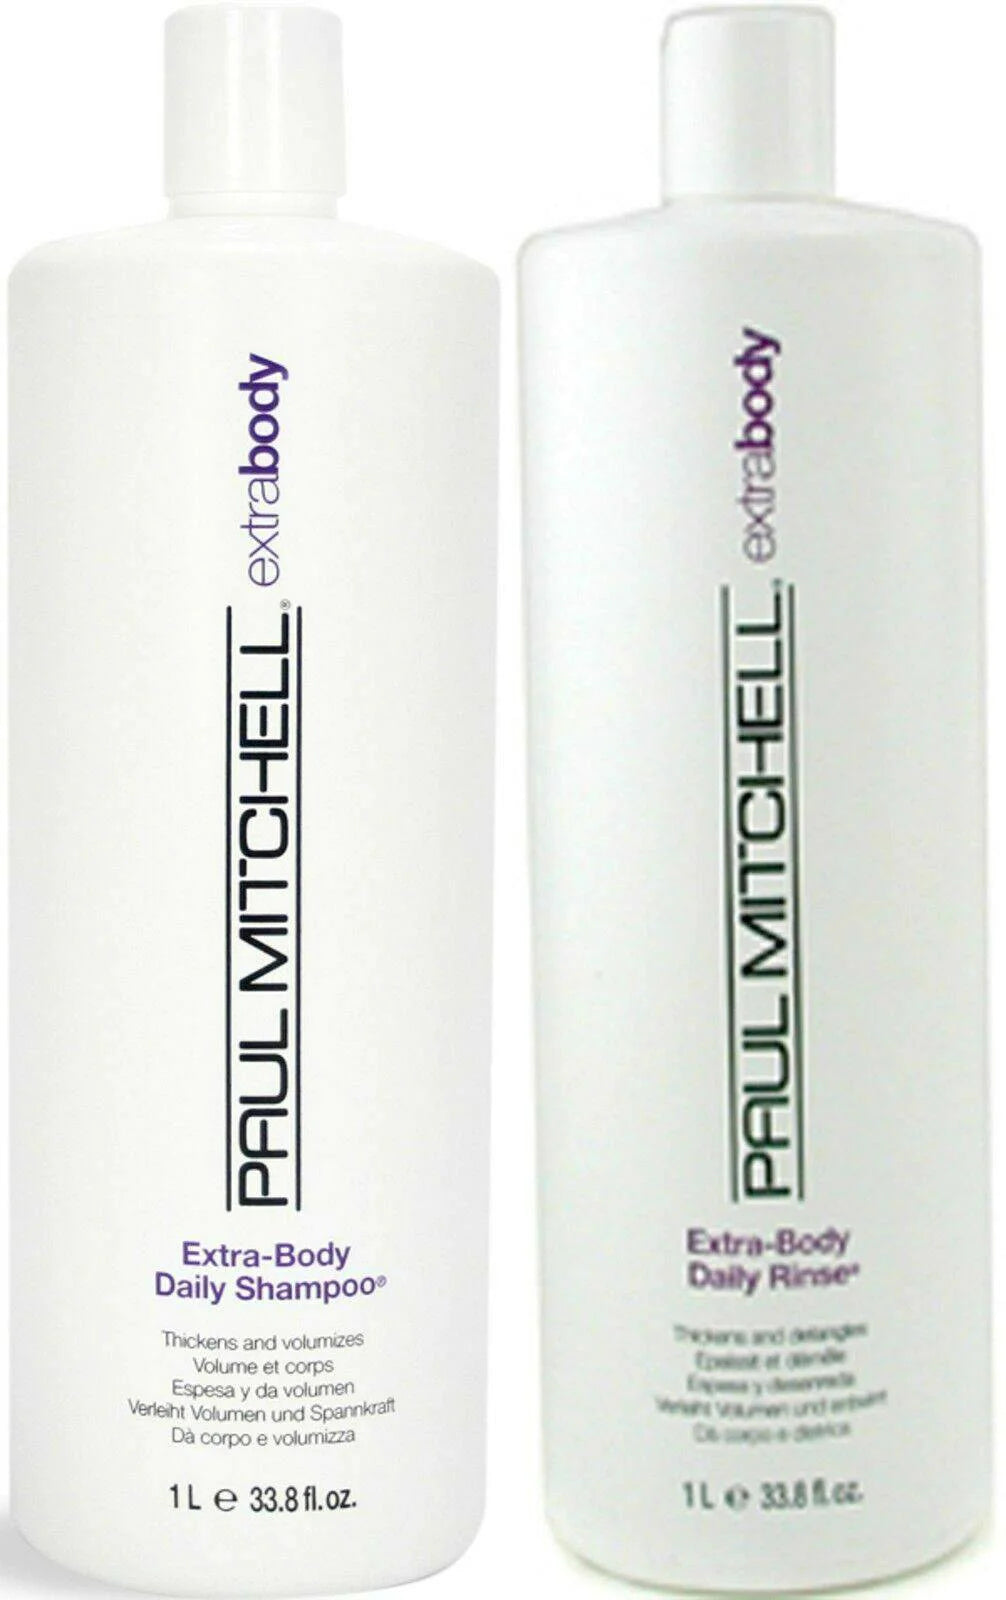 Paul Mitchell Extra-Body Shampoo and Conditioner 1000ml Duo